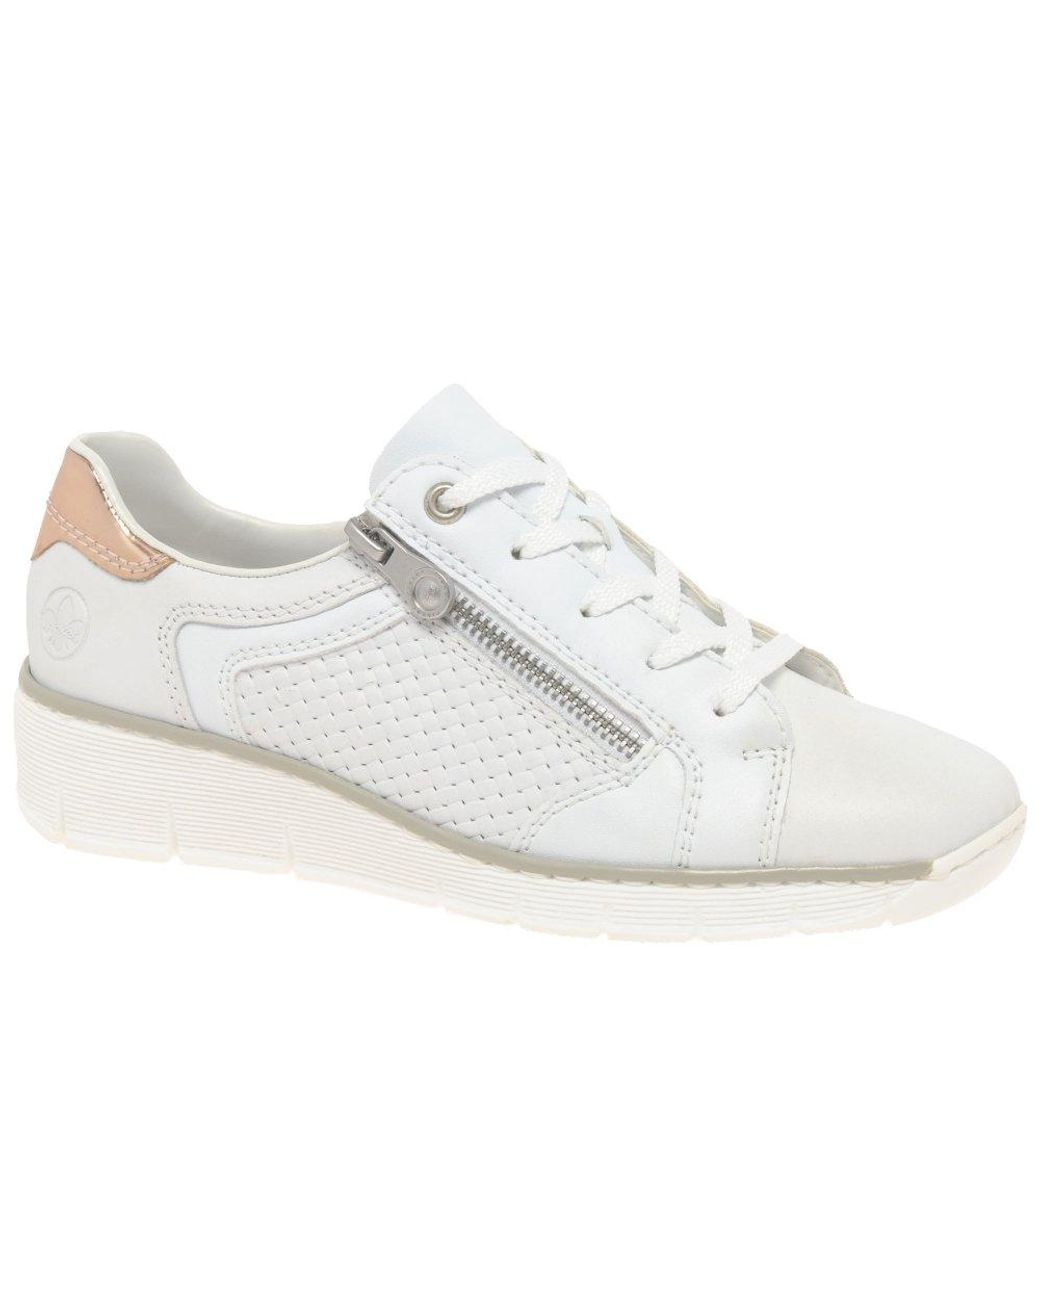 Rieker Reflect Trainers in White | Lyst Canada